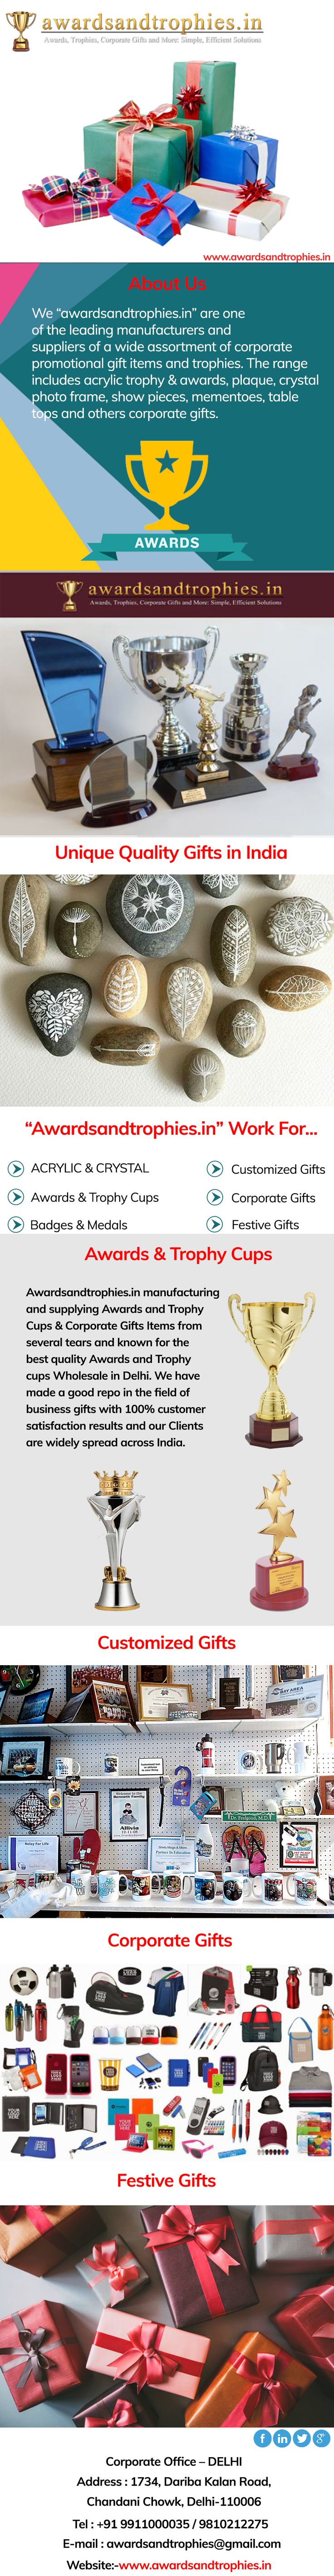 We have been manufacturing and supplying Awards and Trophy Cups & Corporate Gift...